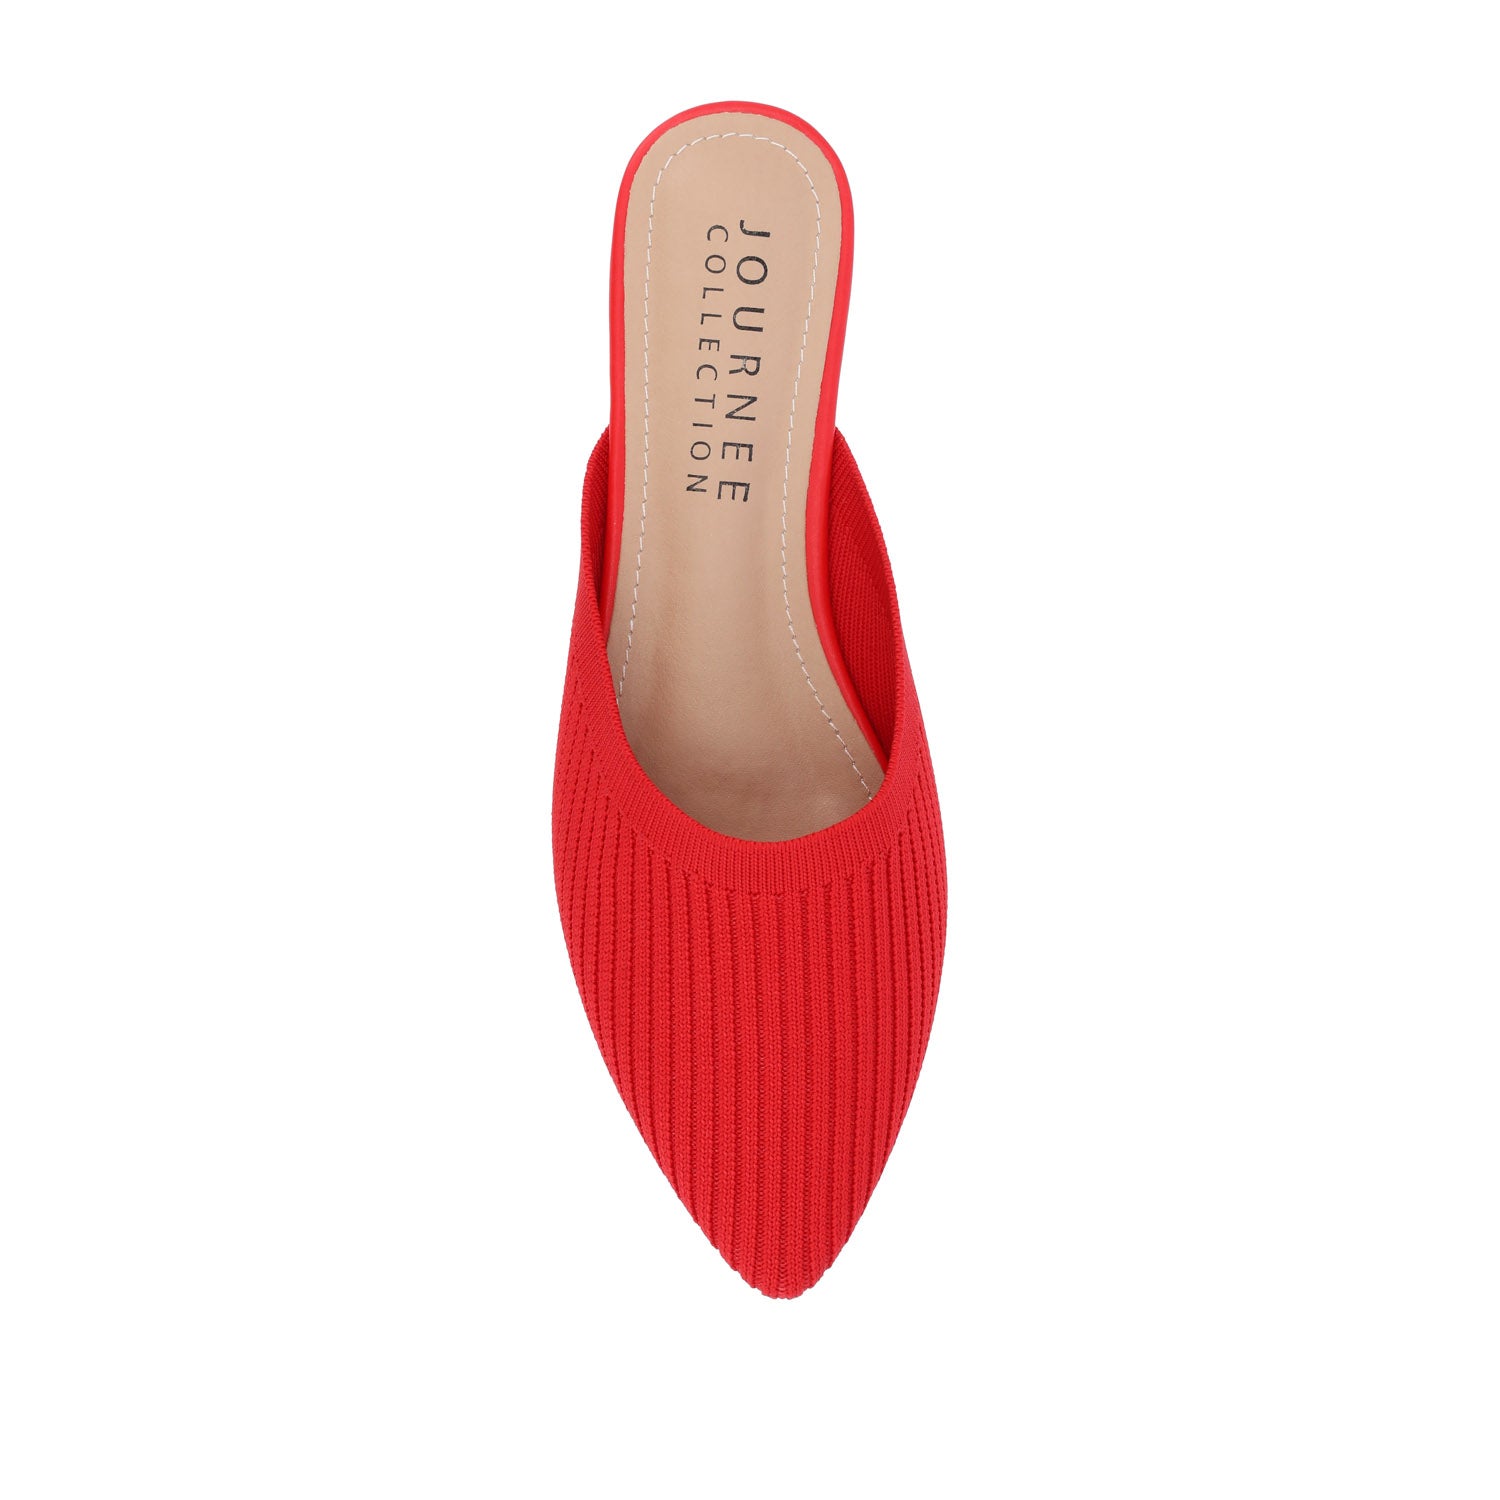 ANIEE MULE FLATS IN STATEMENT KNIT FABRIC